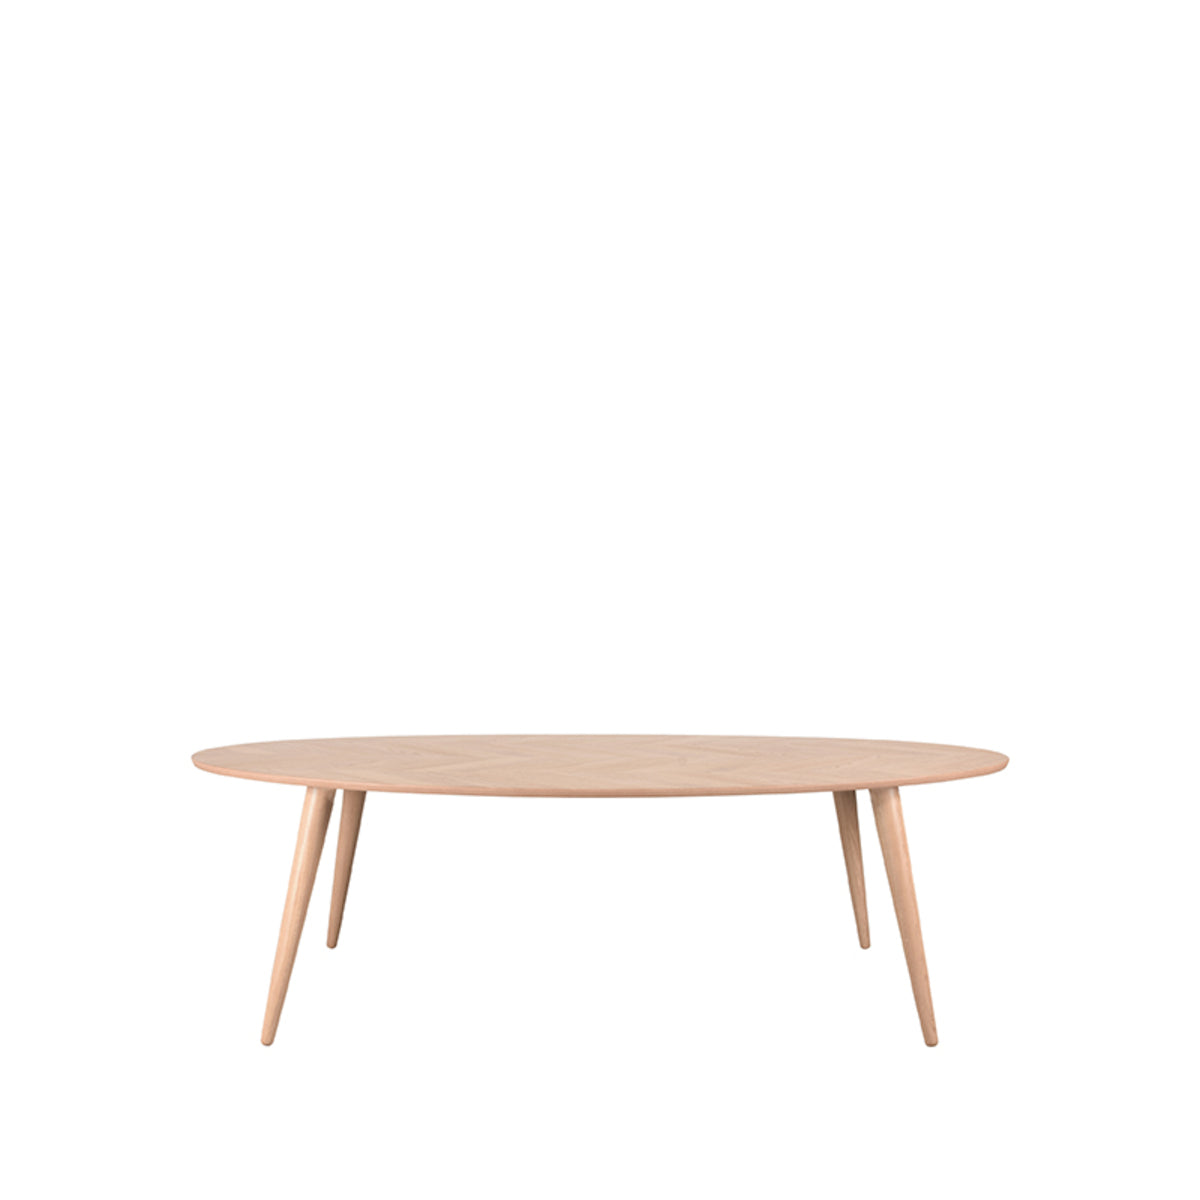 LABEL51 Dining room table Ines - Natural - Oak - 210 cm